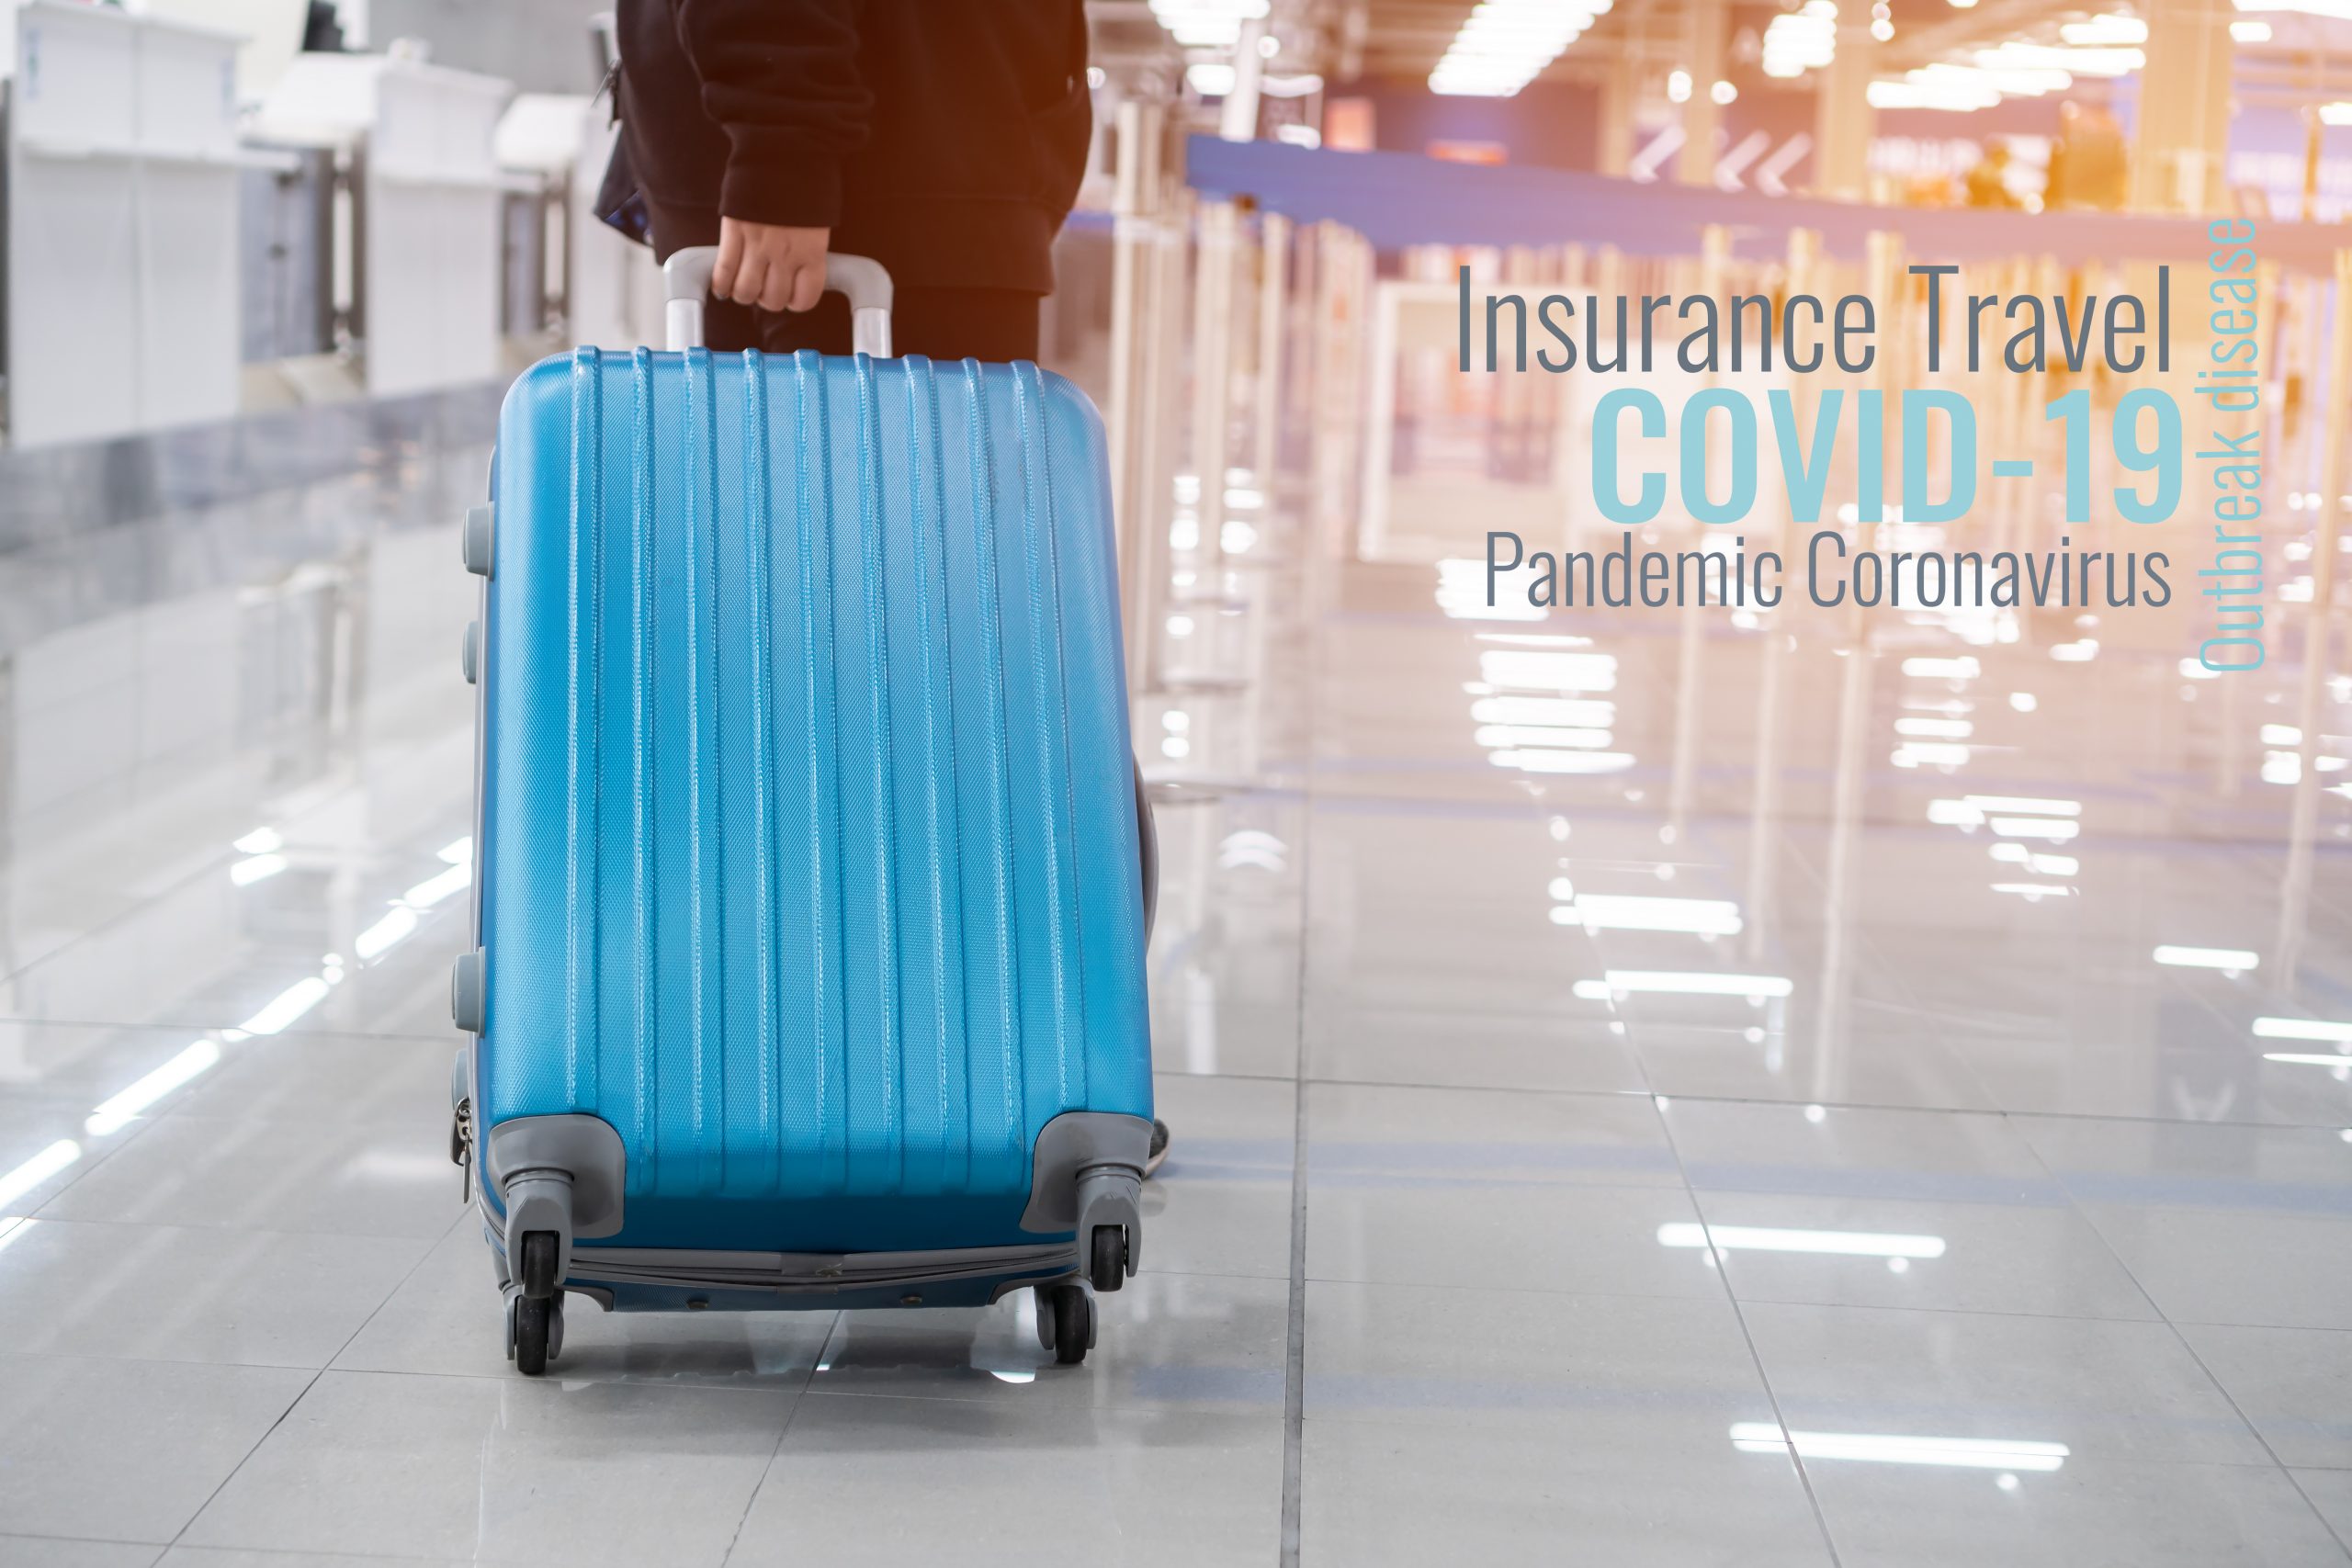 Ontario travel insurance for COVID-19, insurance brokers